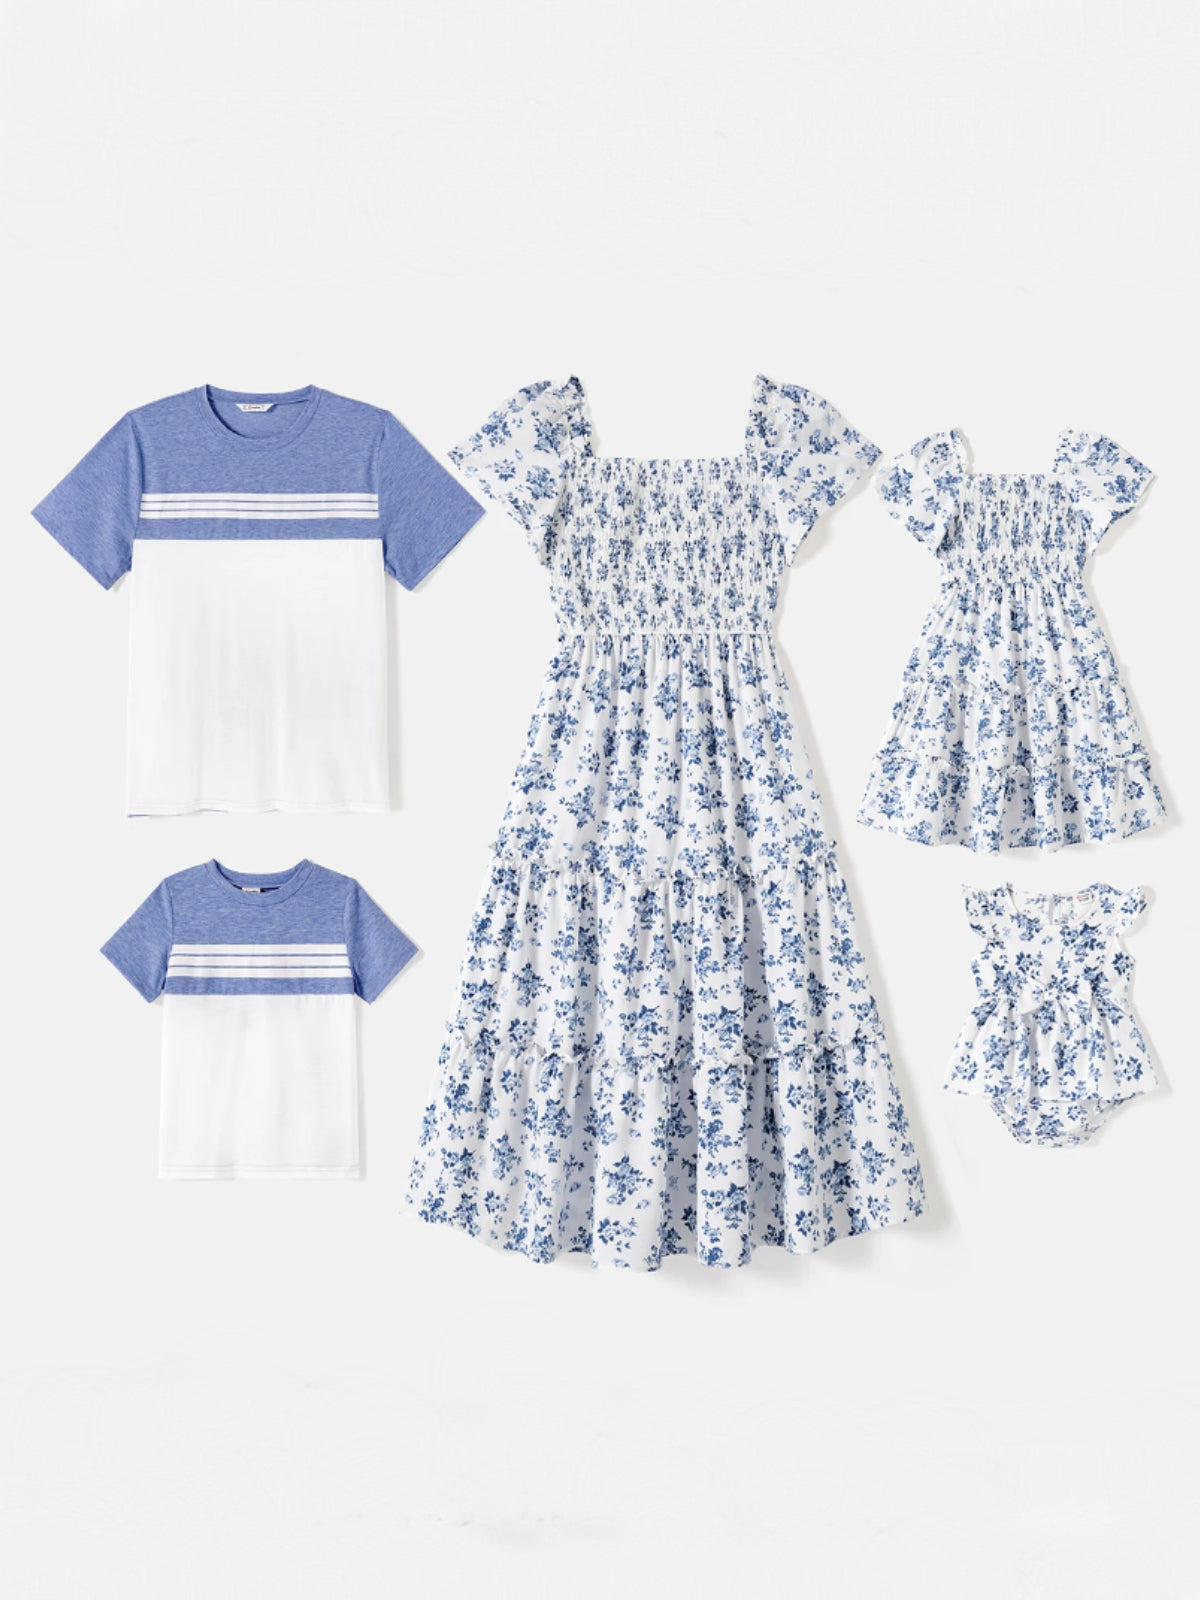 Mia Belle Girls Blue Floral Outfit | Family Matching Outfits